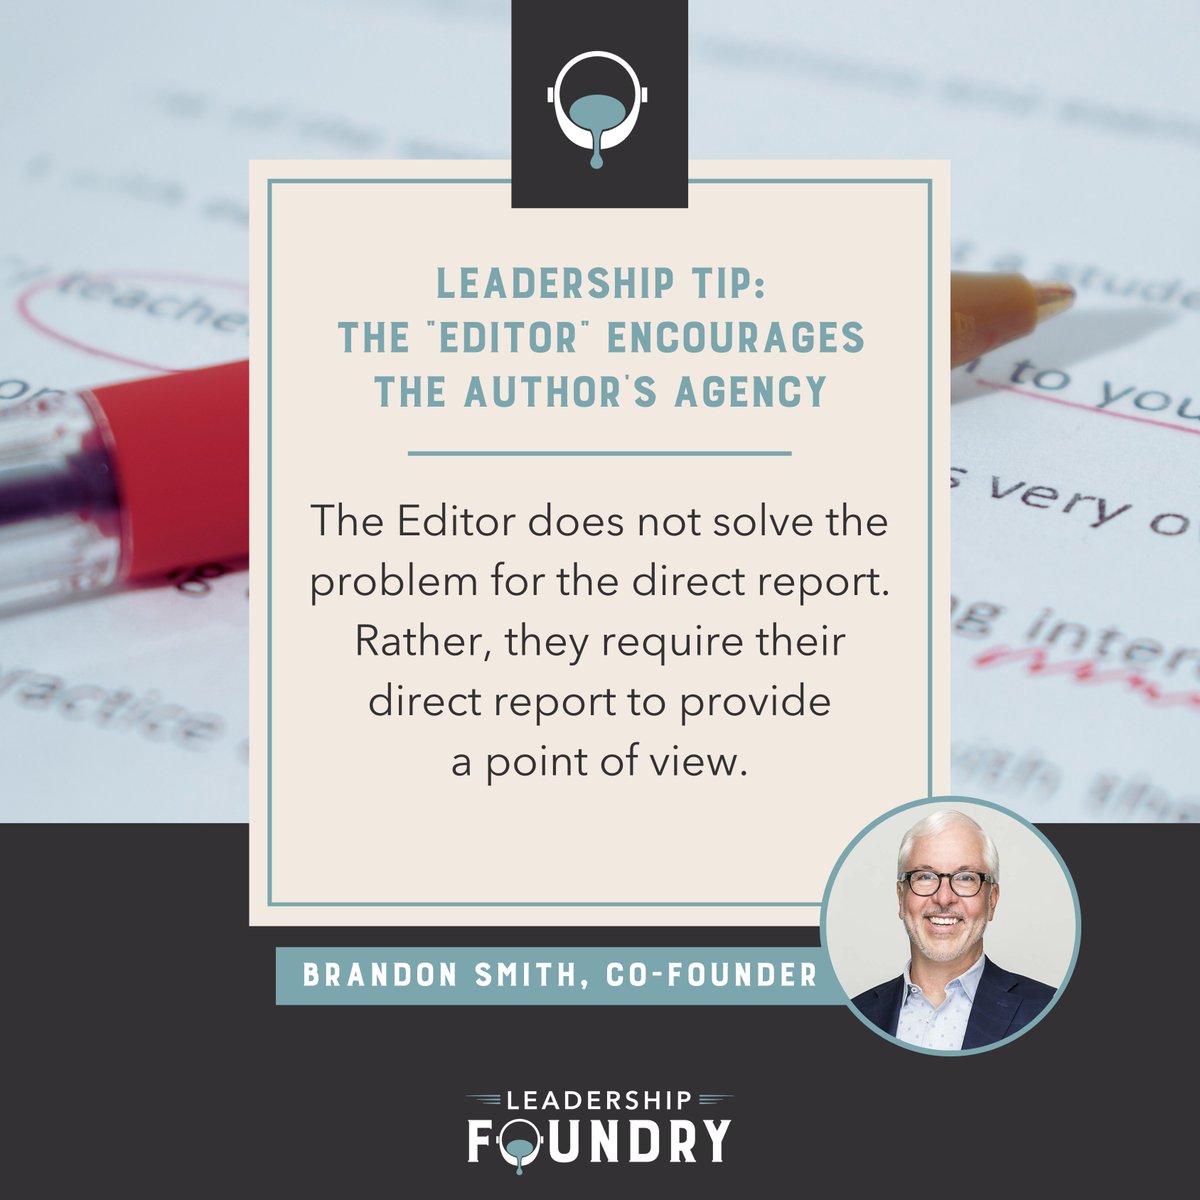 Require your direct reports bring something for you to react to during 1:1 meetings. This will force the direct report to take ownership of the situation.

From my book, “The Author vs. Editor Dilemma” available on Amazon: lnkd.in/gEYXf5jX

#leaders #passthepen